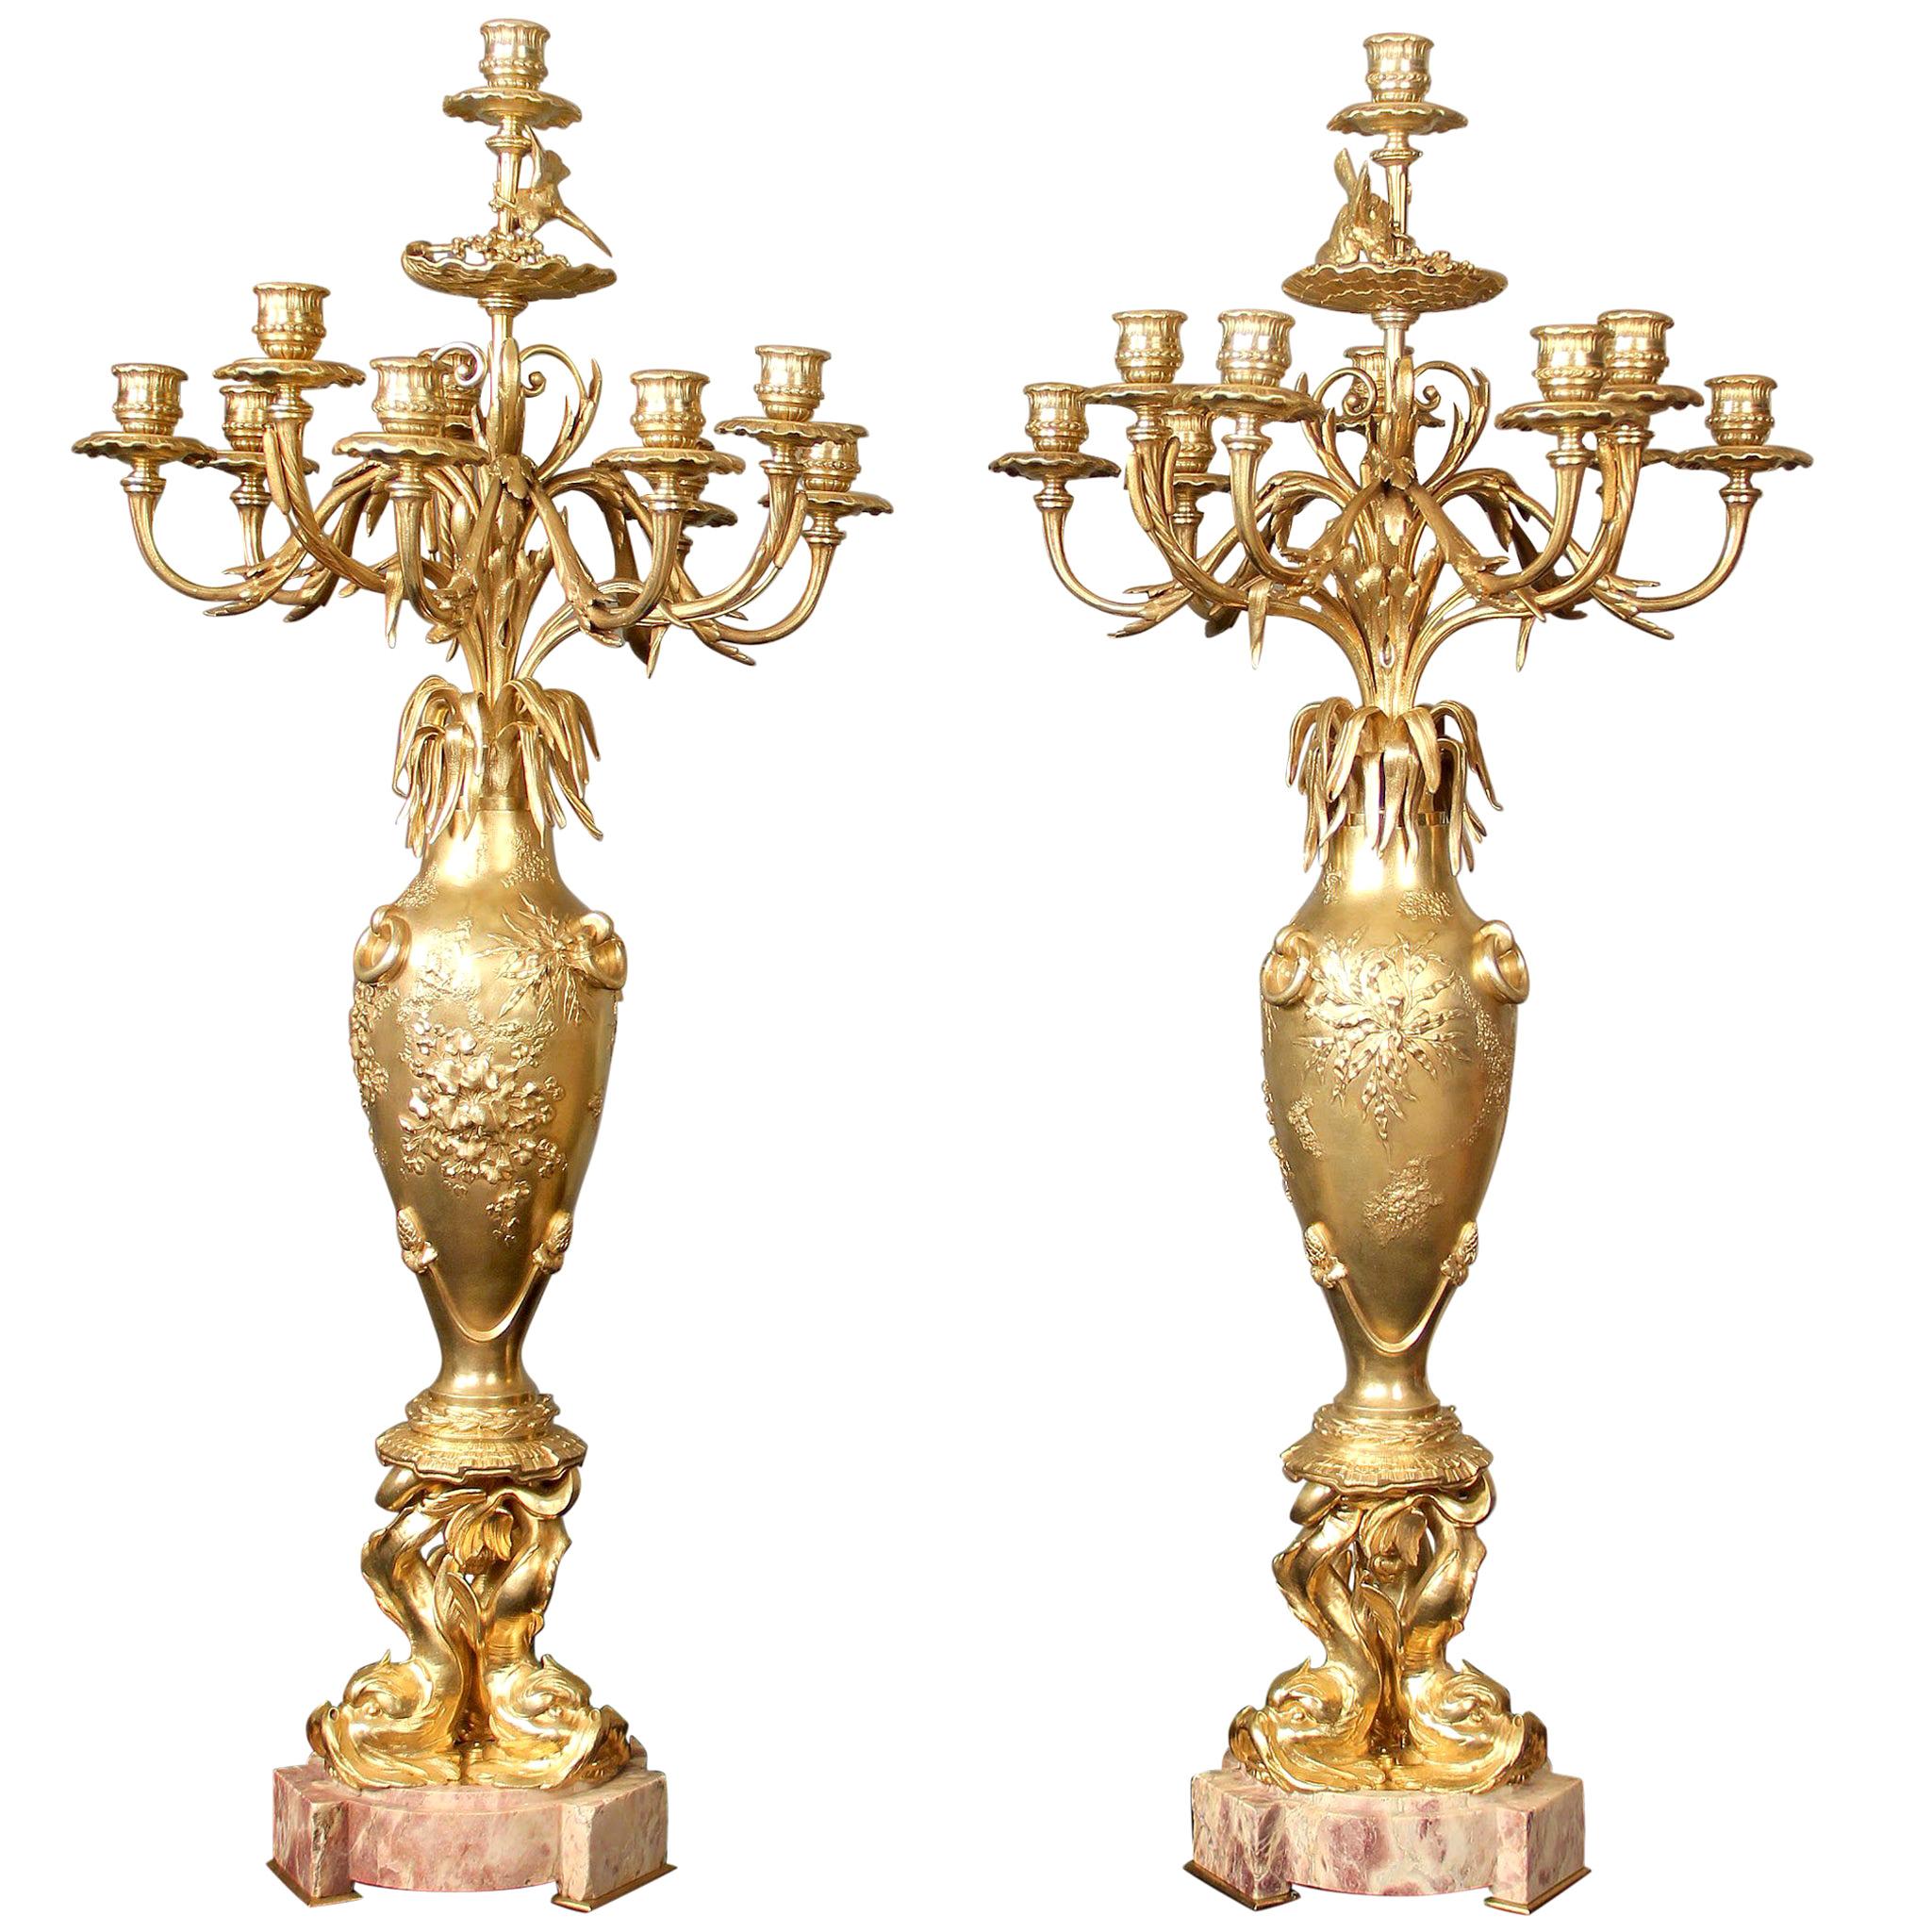 Pair of 19th Century Gilt Bronze "Japonisme" Candelabra by Maison Marnyhac